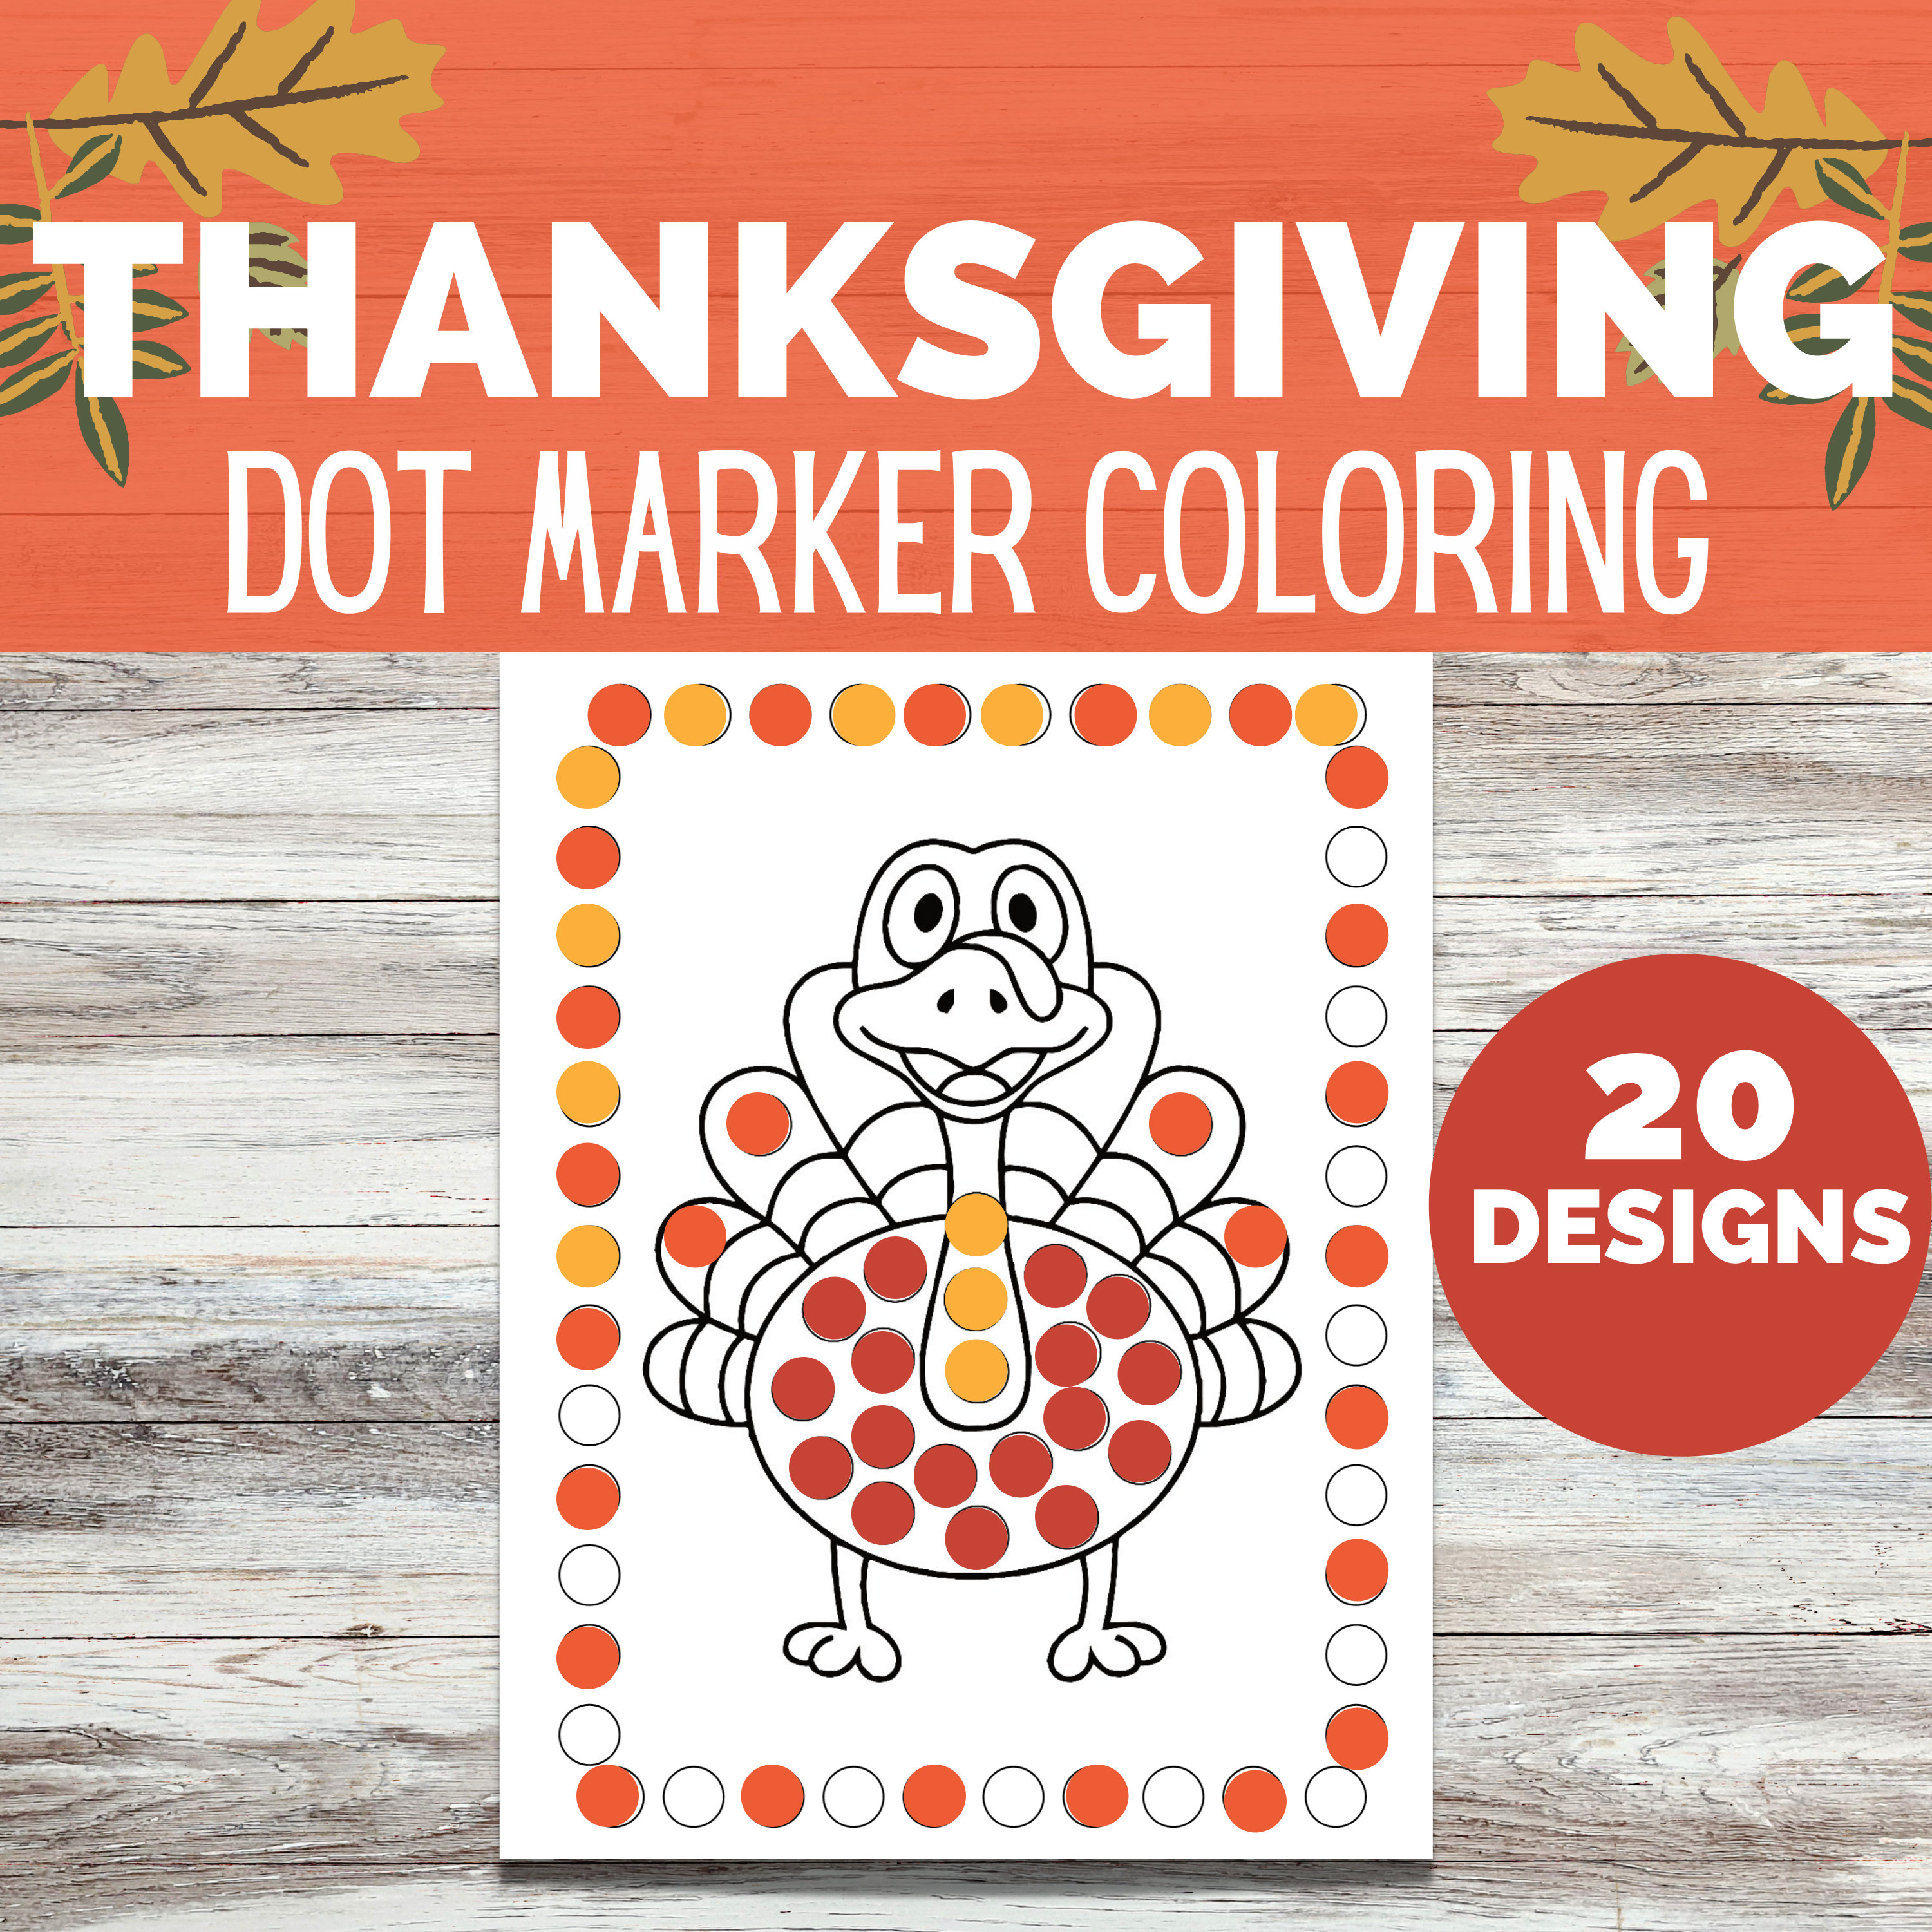 Thanksgiving dot marker coloring pages thanksgiving dab a dot do a dot marker activity book for toddlers